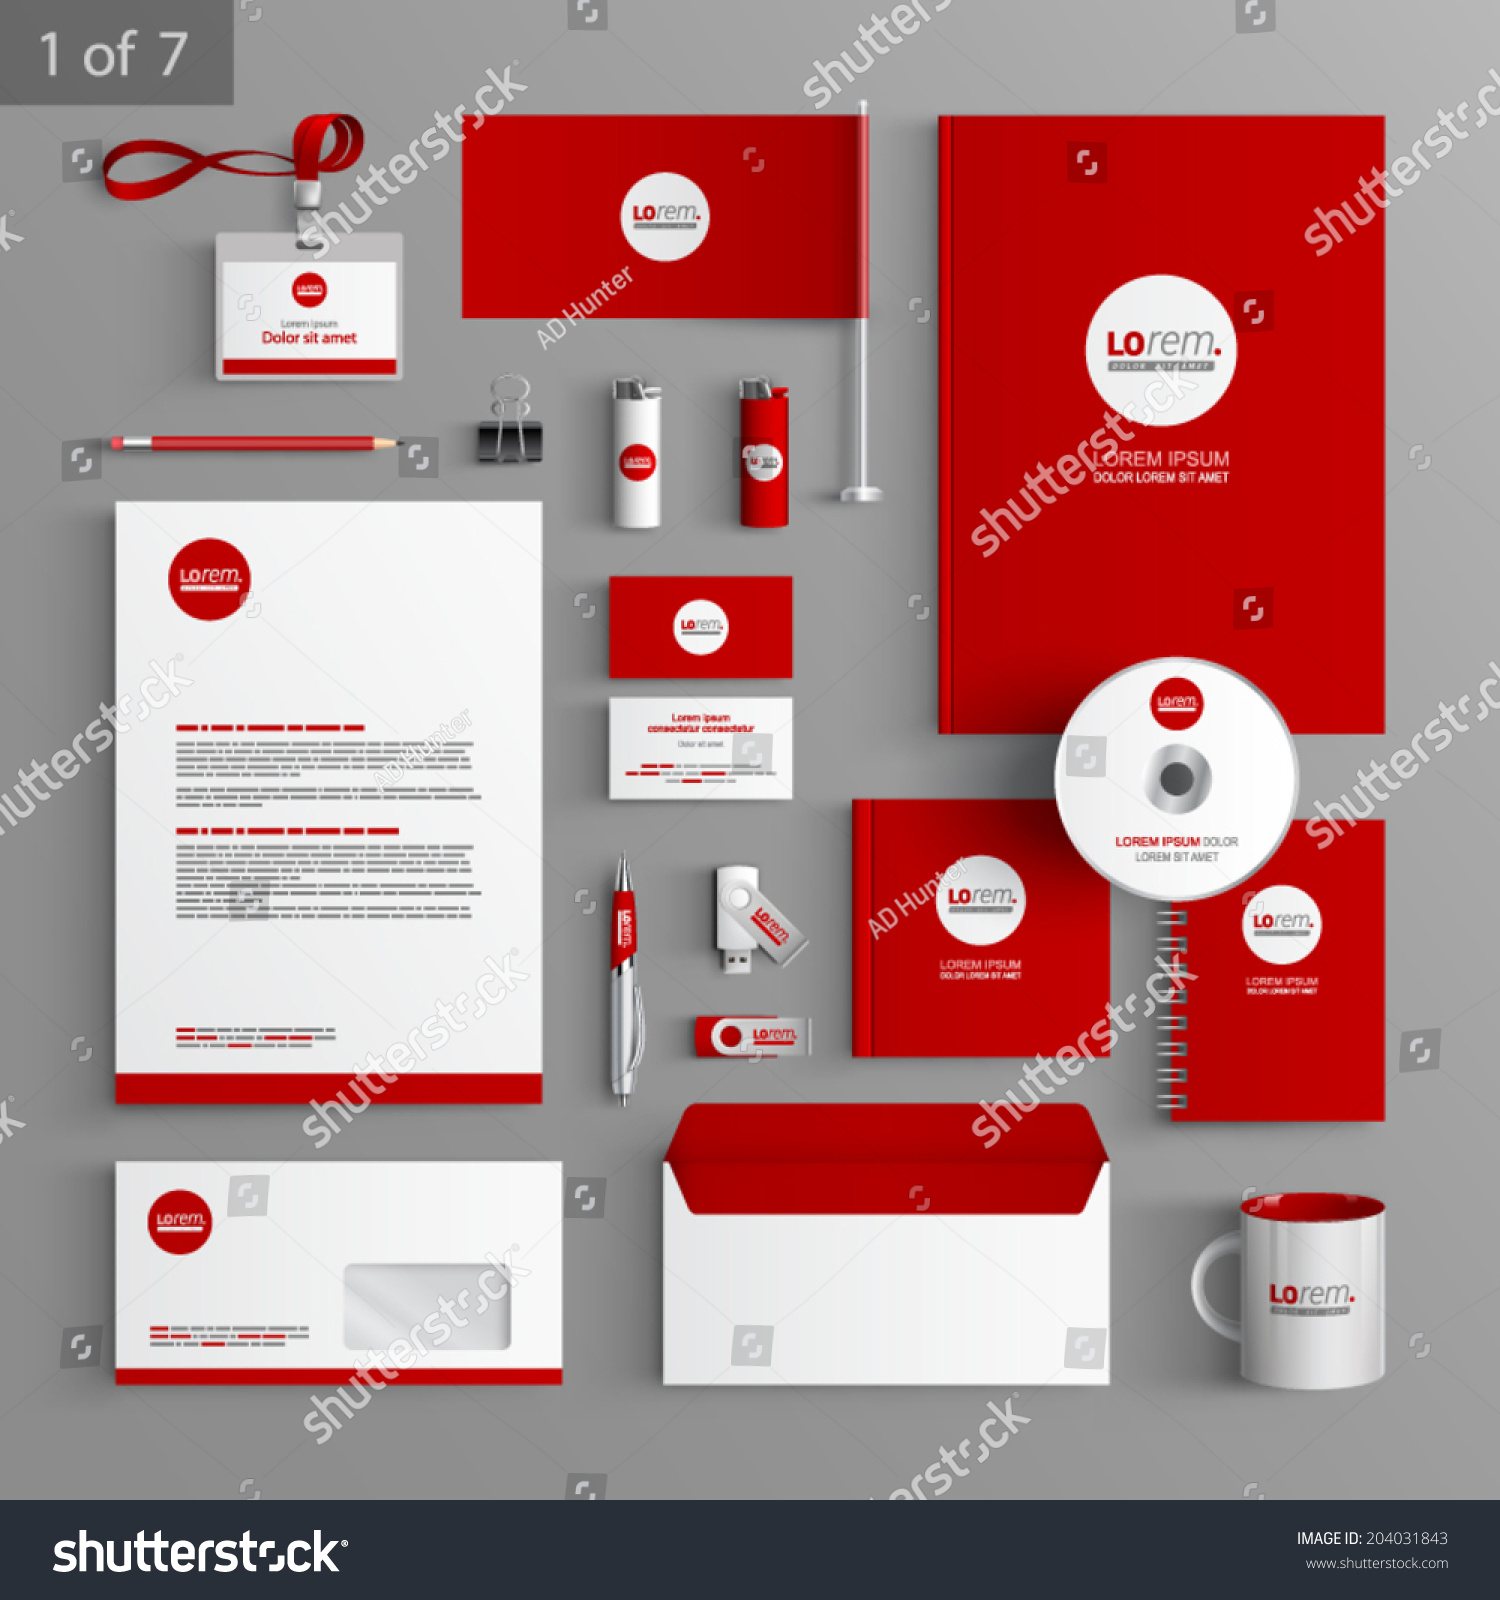 Red stationery template design with round element. Documentation for 